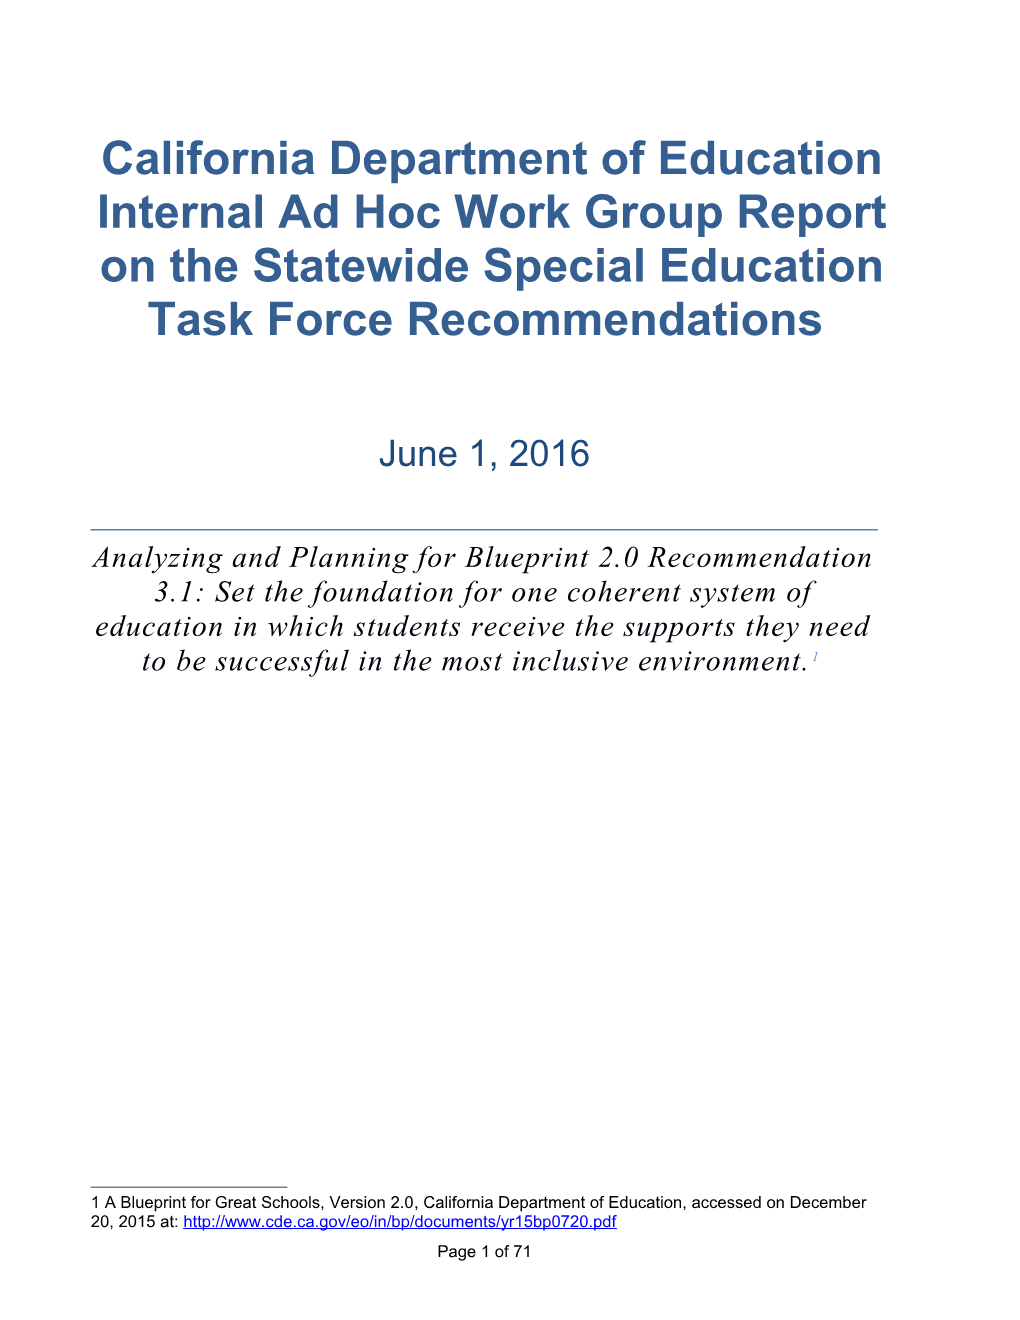 California Department of Education Internal Ad Hoc Work Group Report on Thestatewide Special